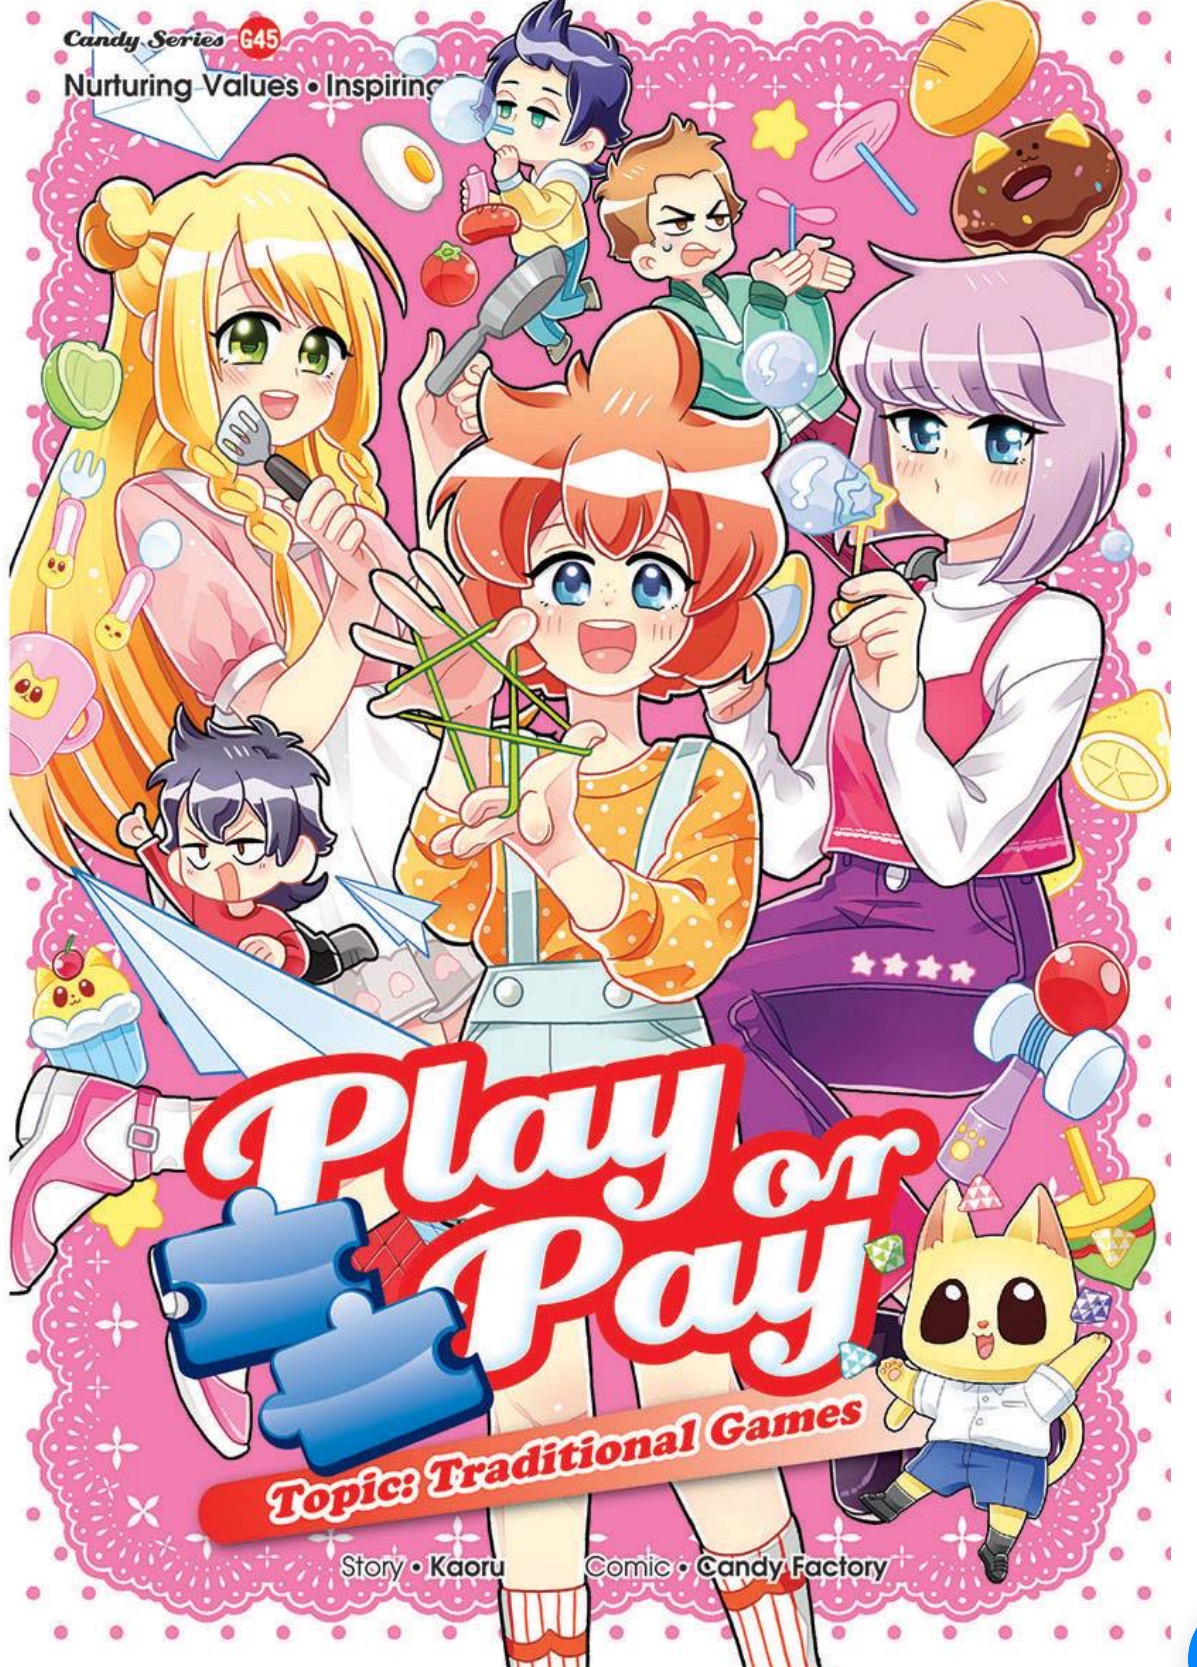 Play or Pay: Traditional Games, Candy Meow Series Wikia